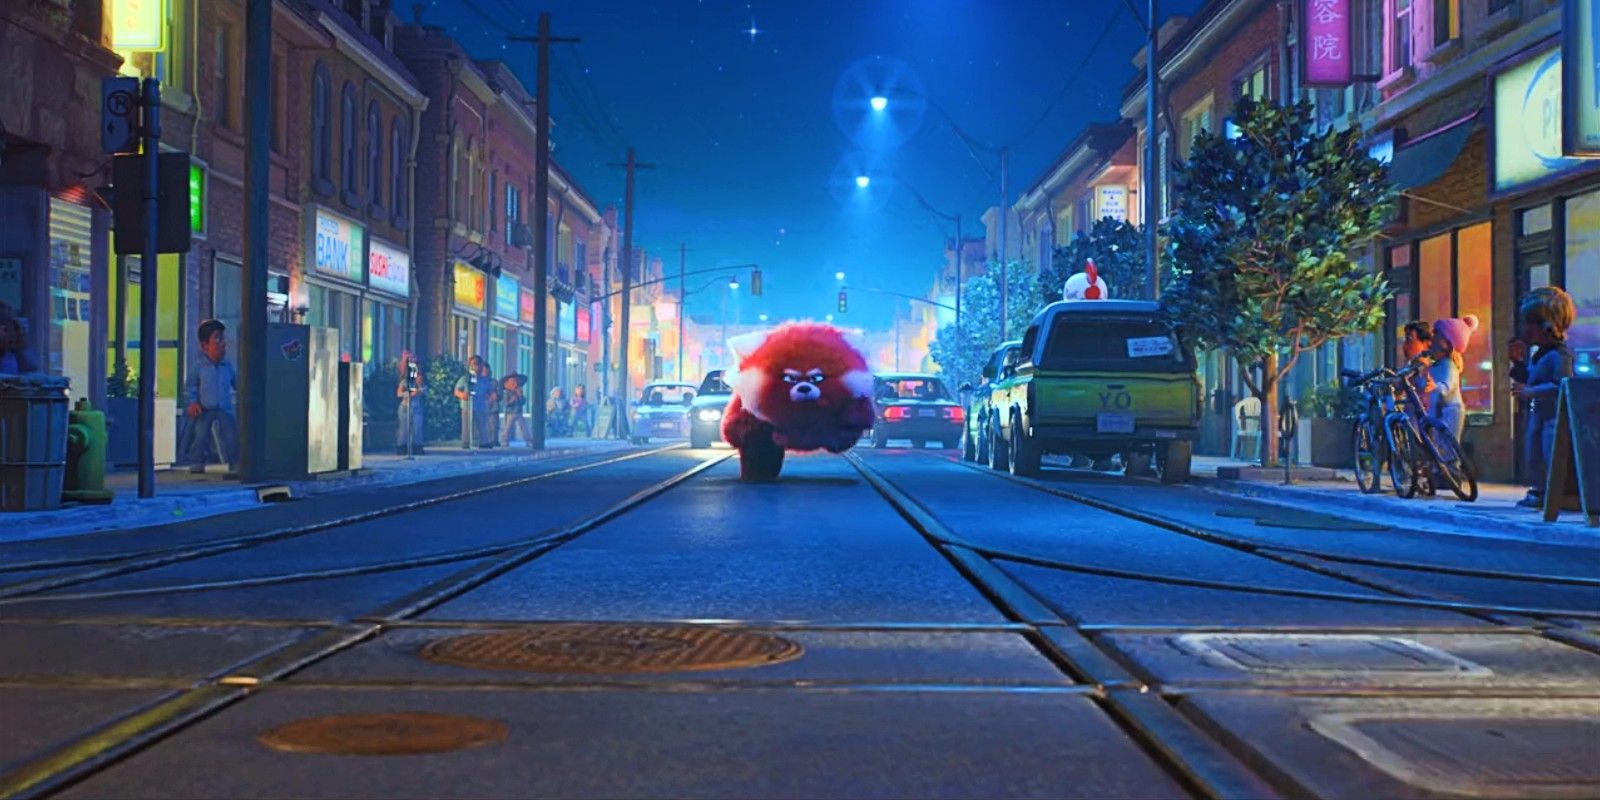 Pixar's Pizza Planet truck turns red